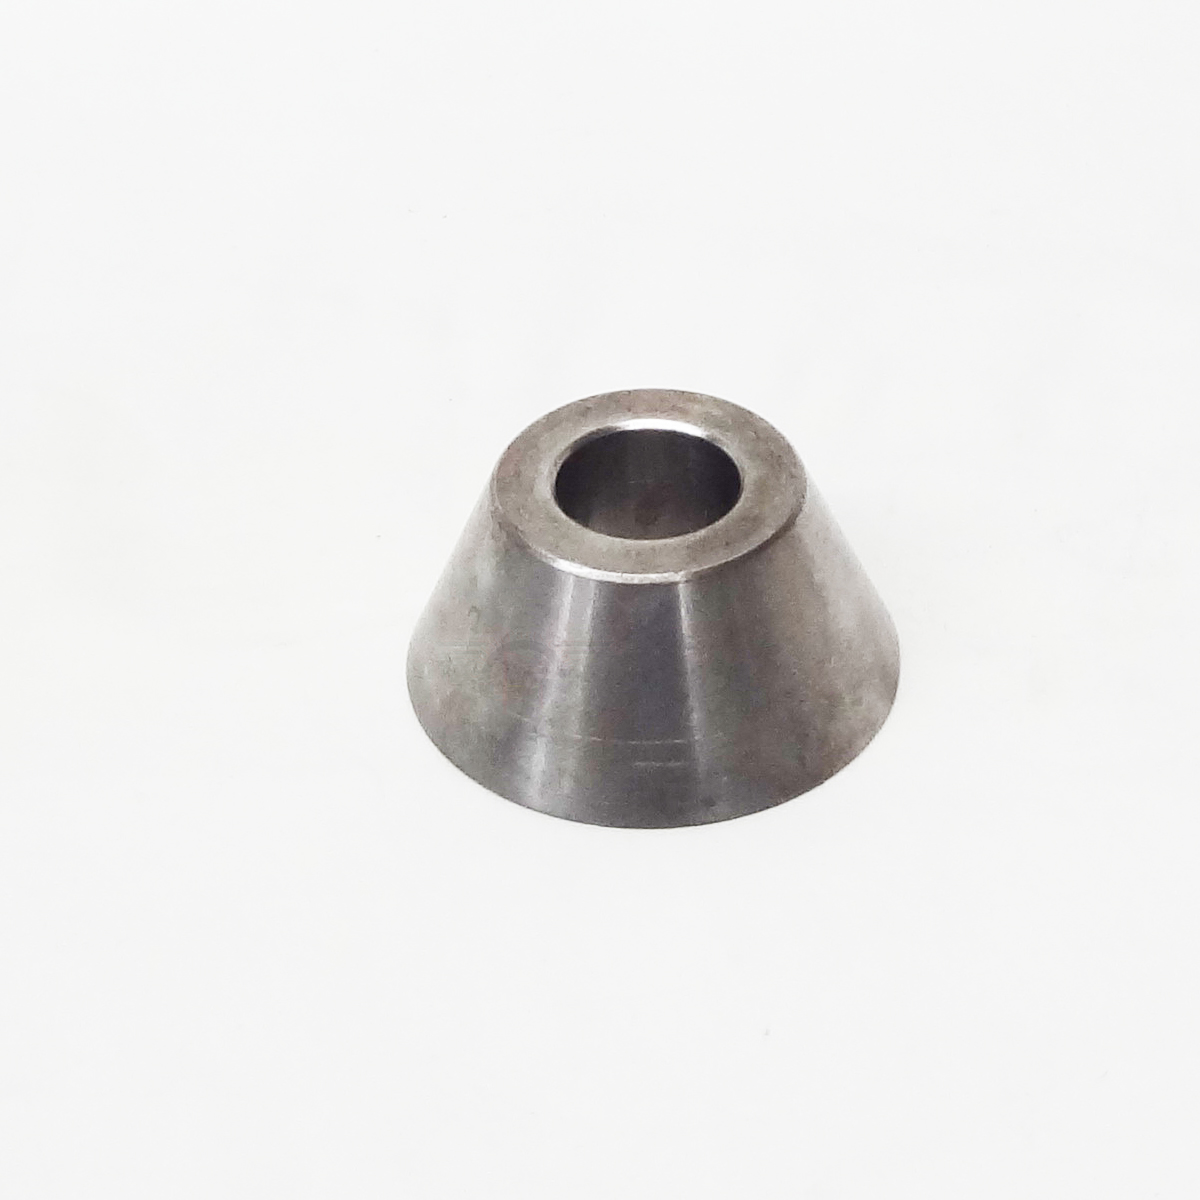 Online Auto Supply Centering Cone 1.187-2.250 for Ammco Brake Lathe 3903 